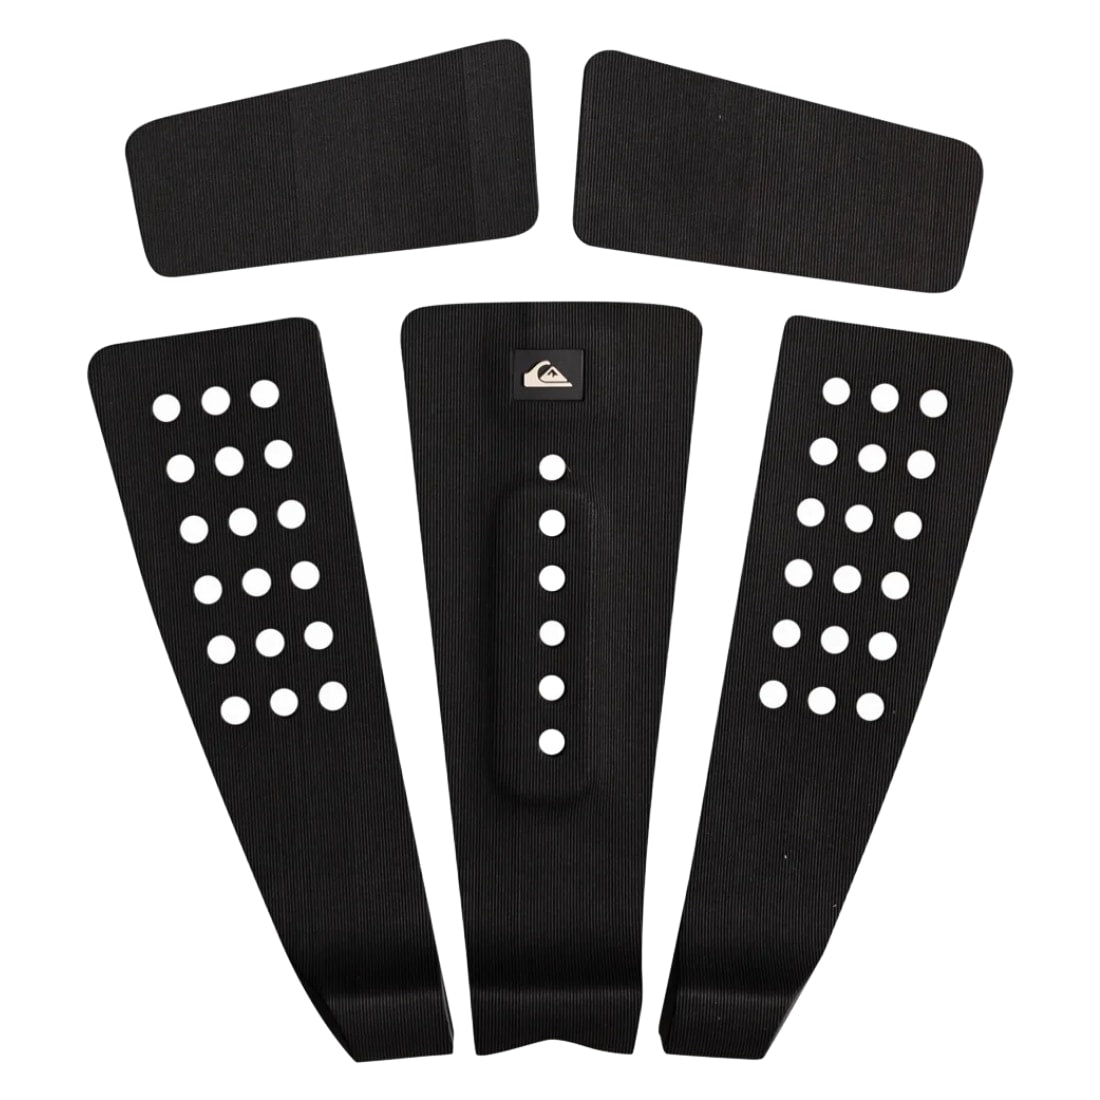 Quiksilver New Wave 2.0 Tail Pad - Black - 5+ Piece Tail Pad by Quiksilver